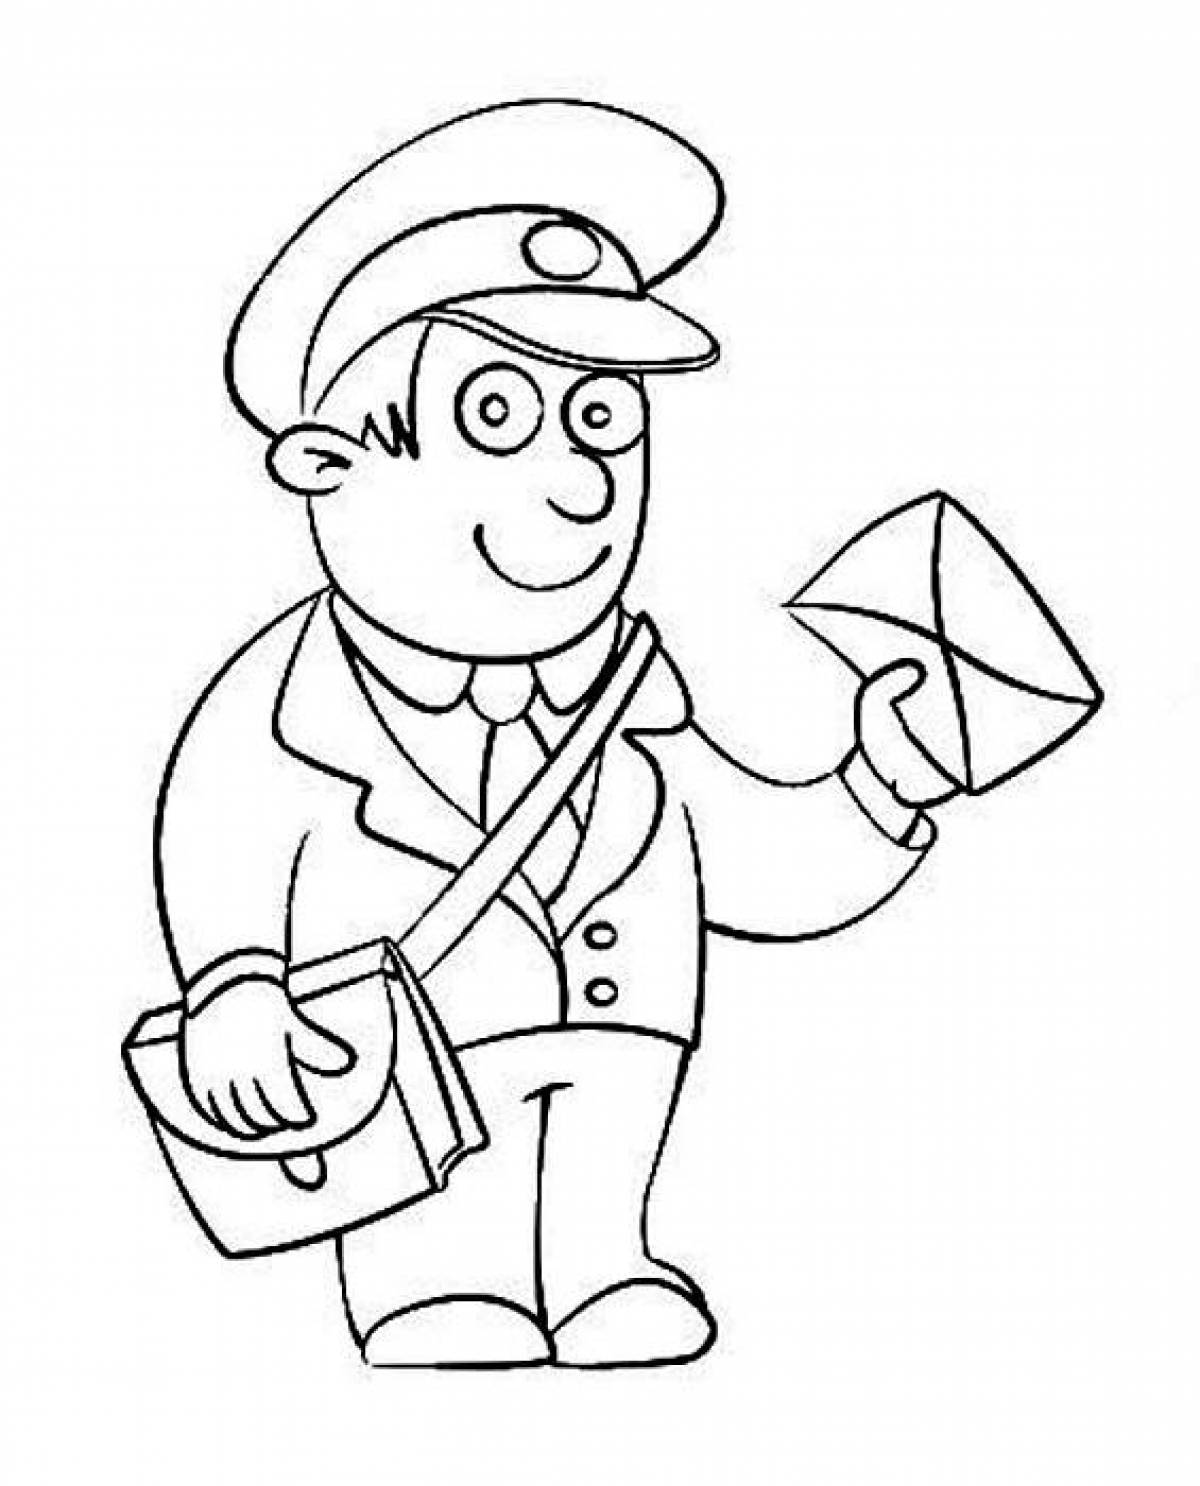 Fun profession coloring pages for 3-4 year olds